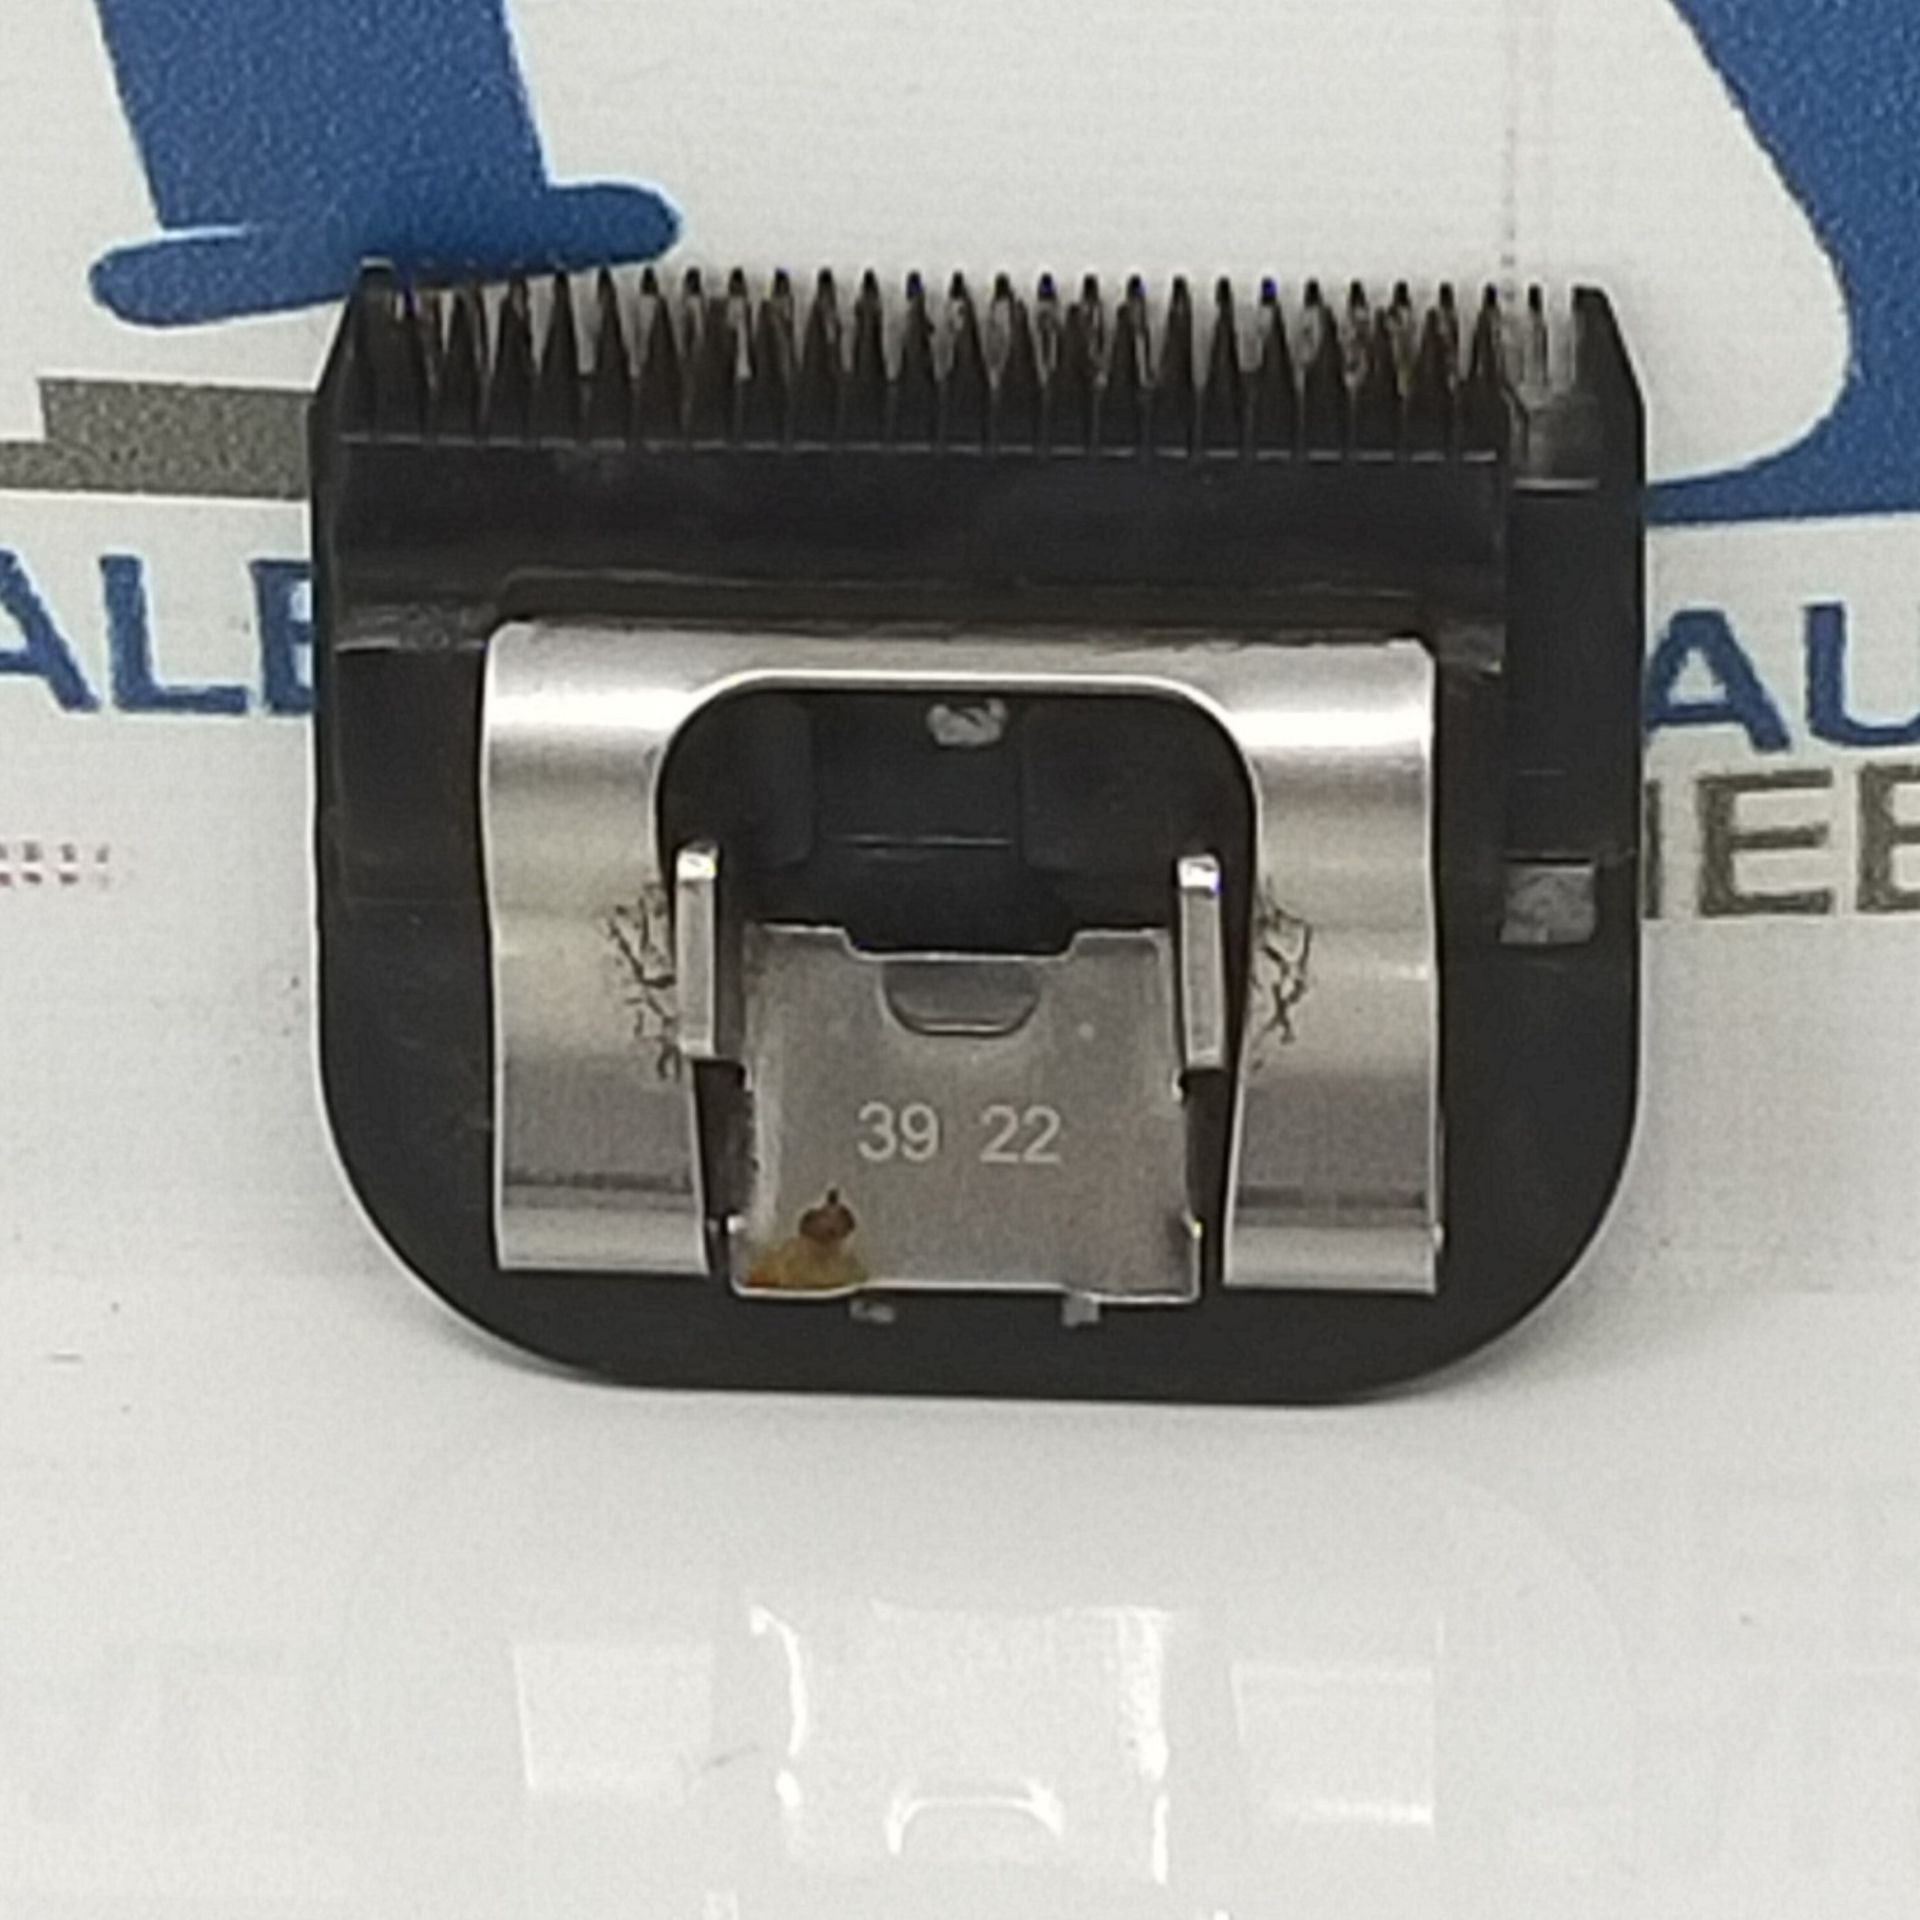 Wahl Professional Animal #30 Ultimate Competition Series Detachable Blade #2355-500 - Image 3 of 3